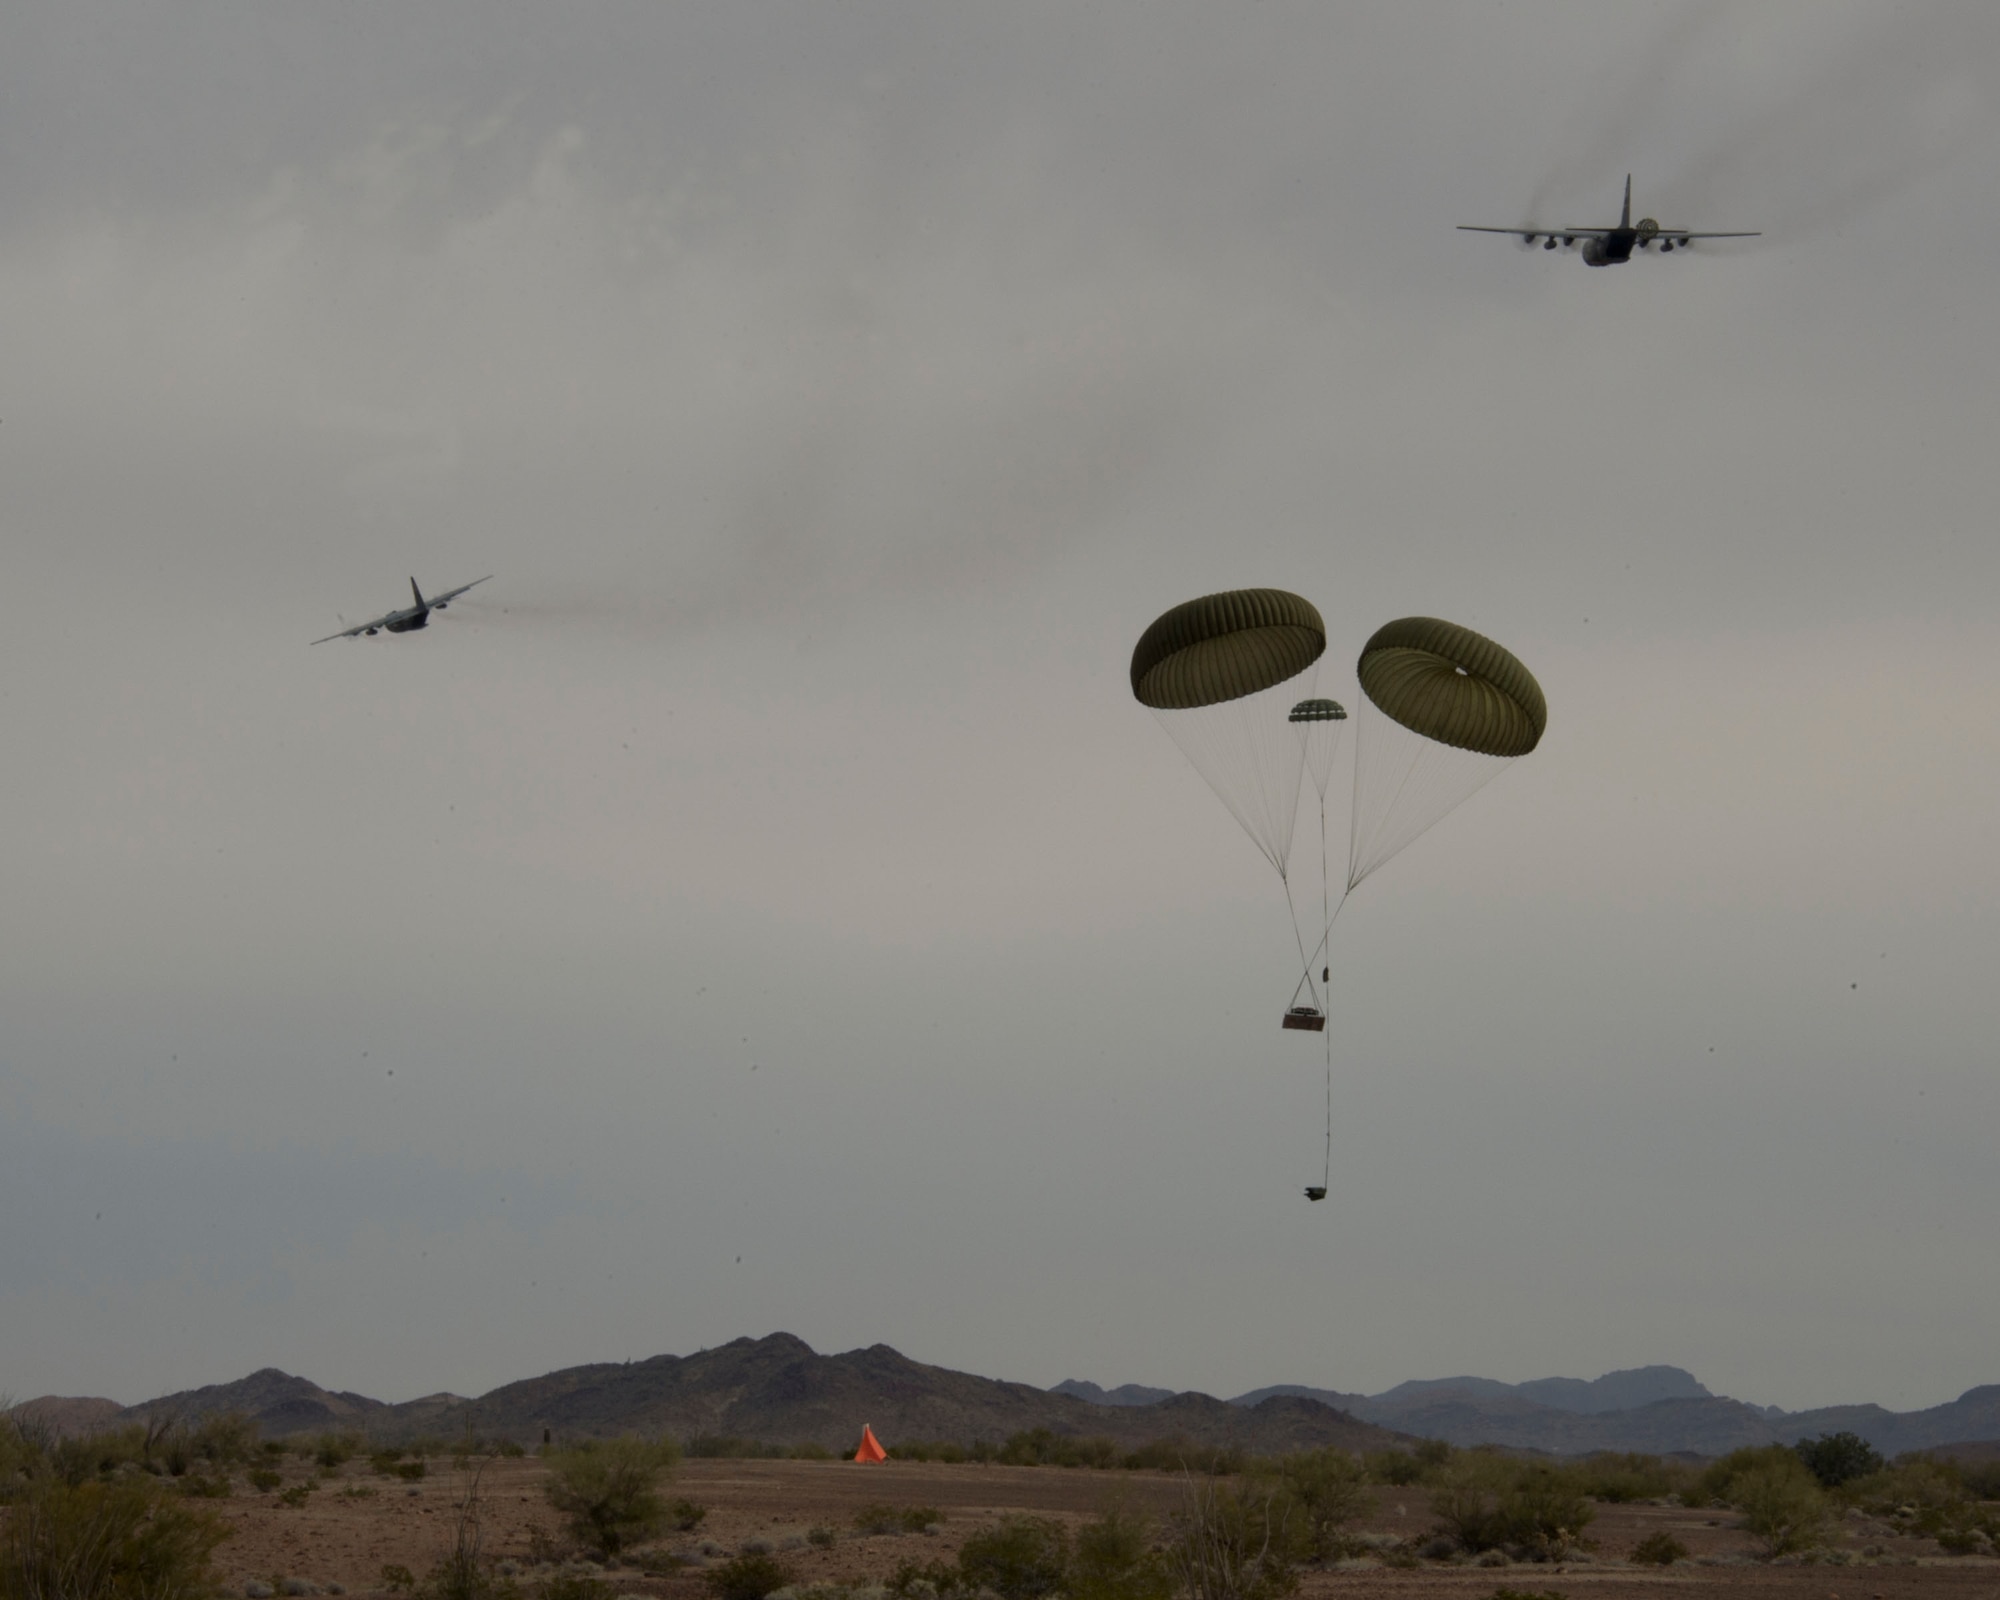 Airmen from the 109th Airlift Squadron conduct a low-cost, low-altitude airdrop in Yuma, Ariz. Feb., 25, 2014. The Airmen are making use of the warm climate to accomplish six-months of airdrops and other annual training requirements in a six-day time period.
(U.S. Air National Guard photo Tech. Sgt. Amy M. Lovgren/ Released) 
